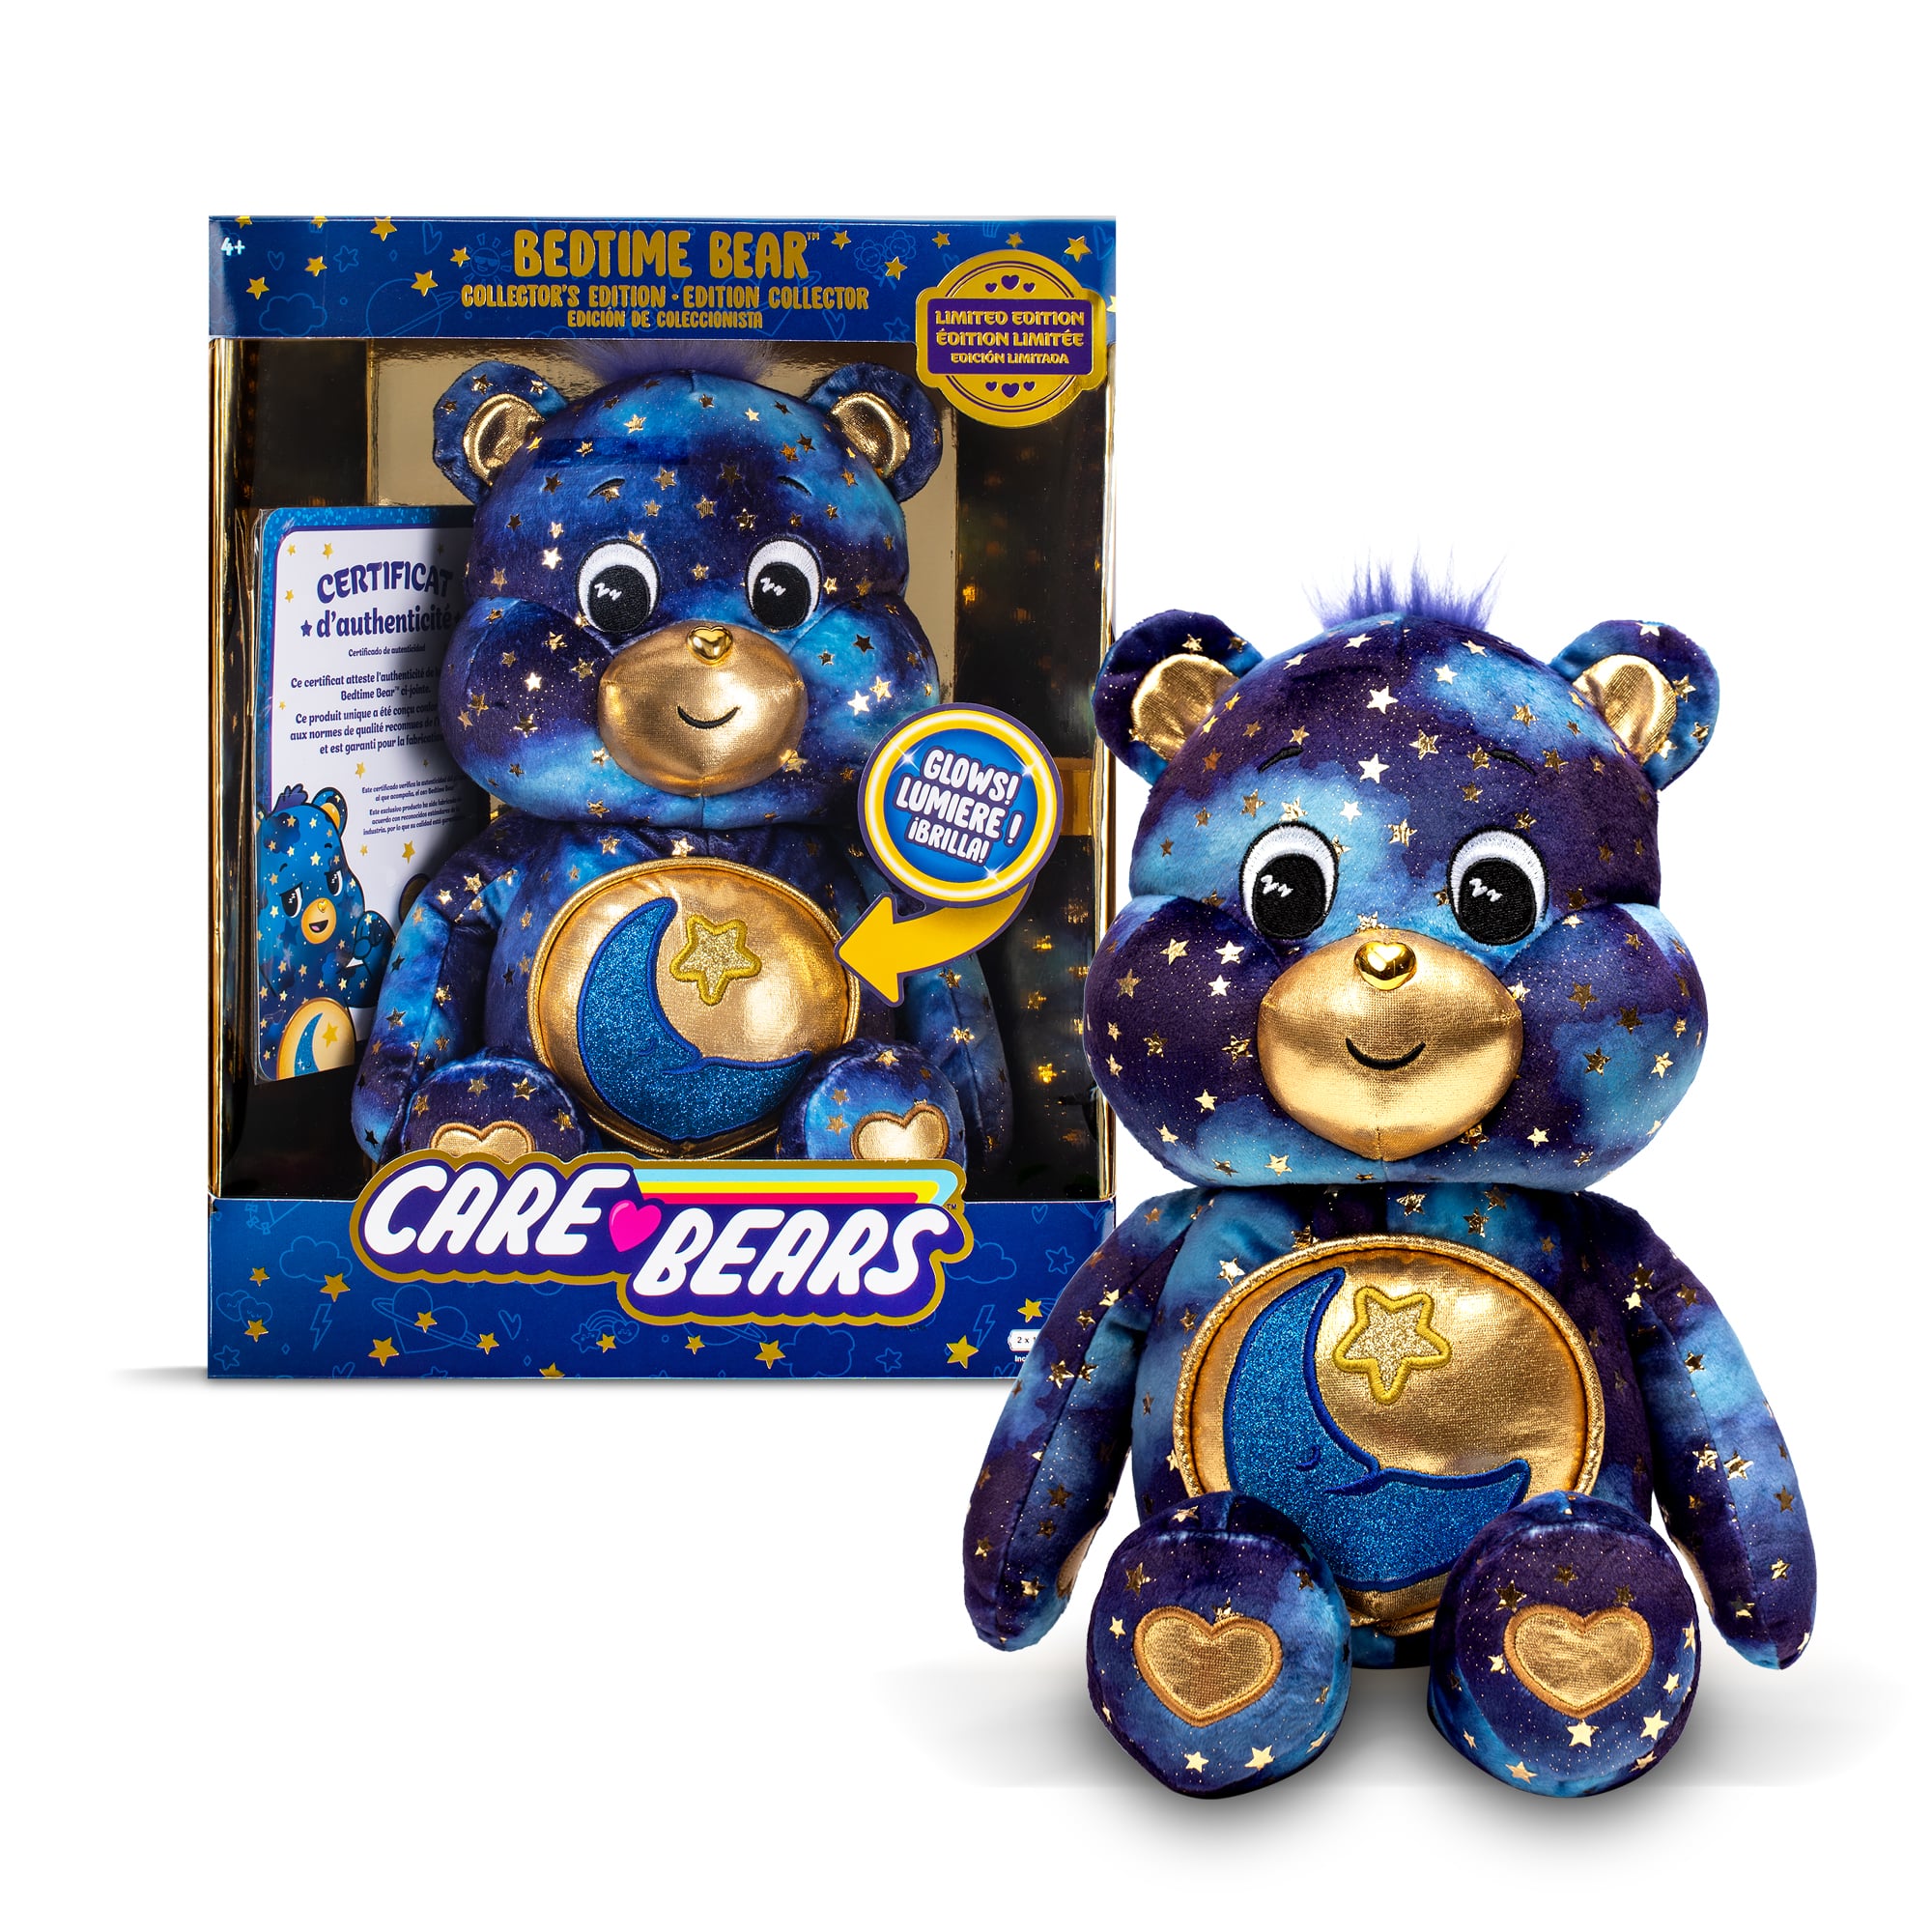 Exclusive Care Bears Dare to Care Bear™ Gold Edition 14 Plush